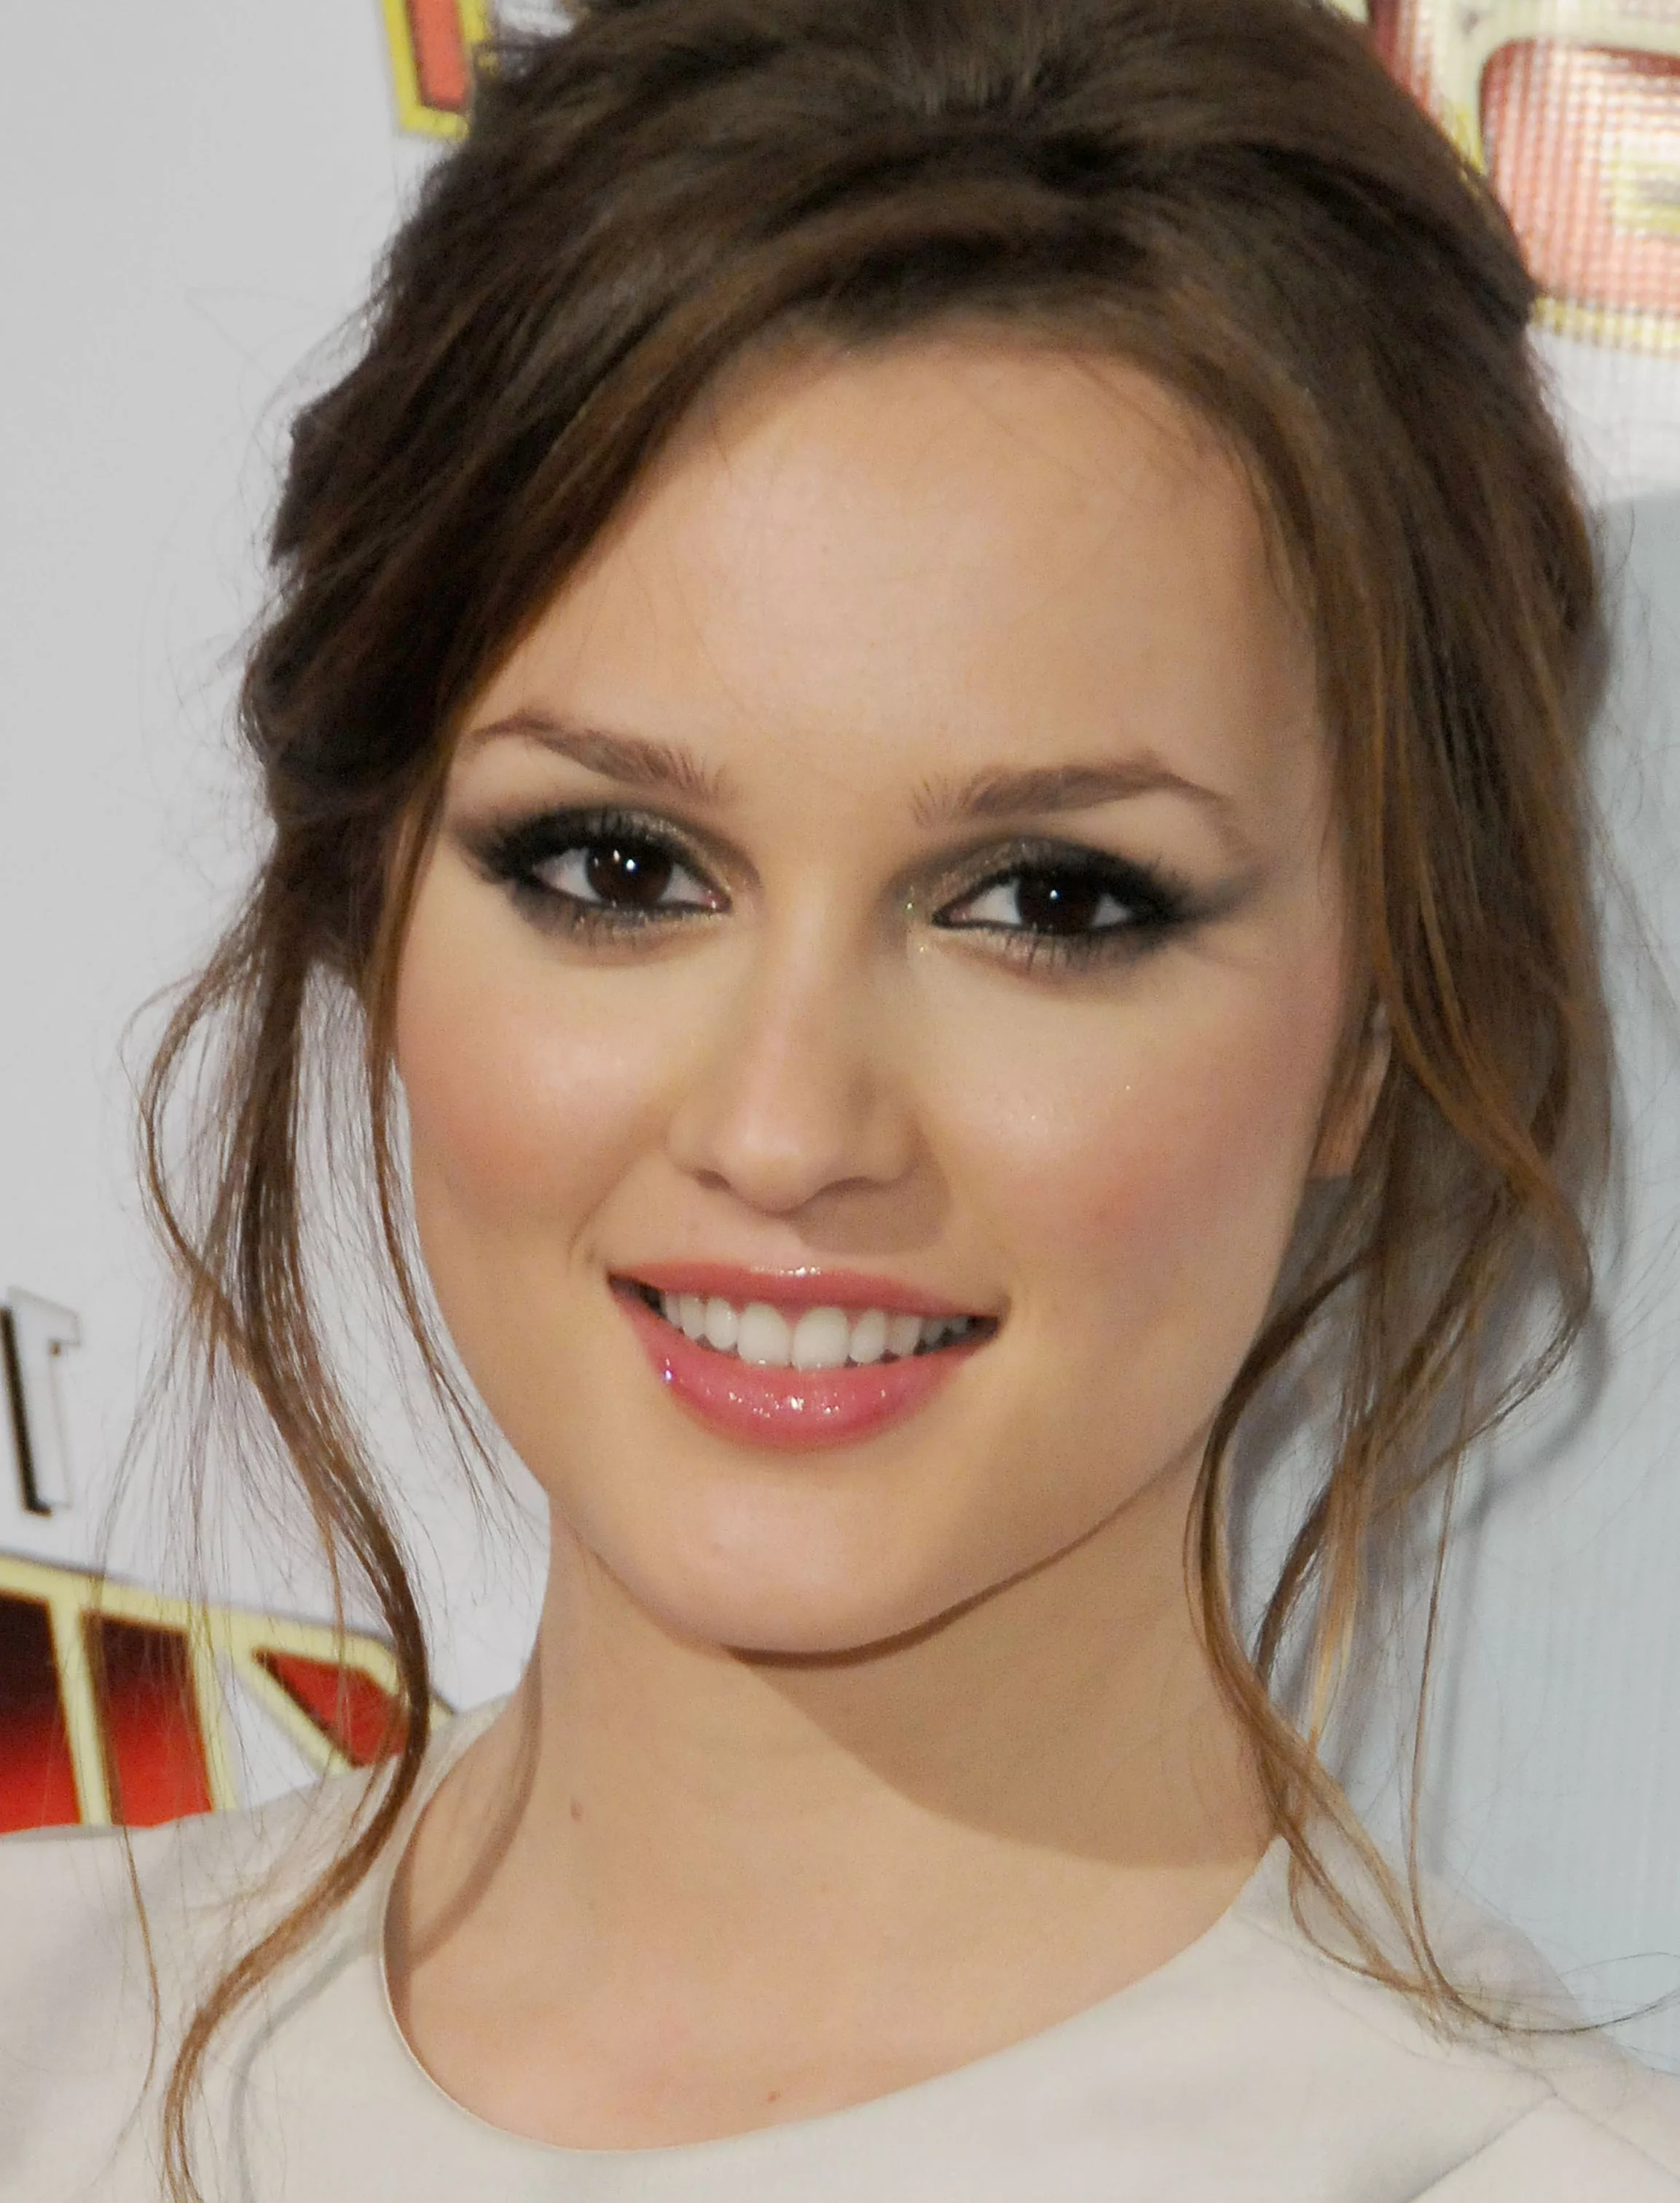 Leighton Meester Private Pics - Fappening Sauce